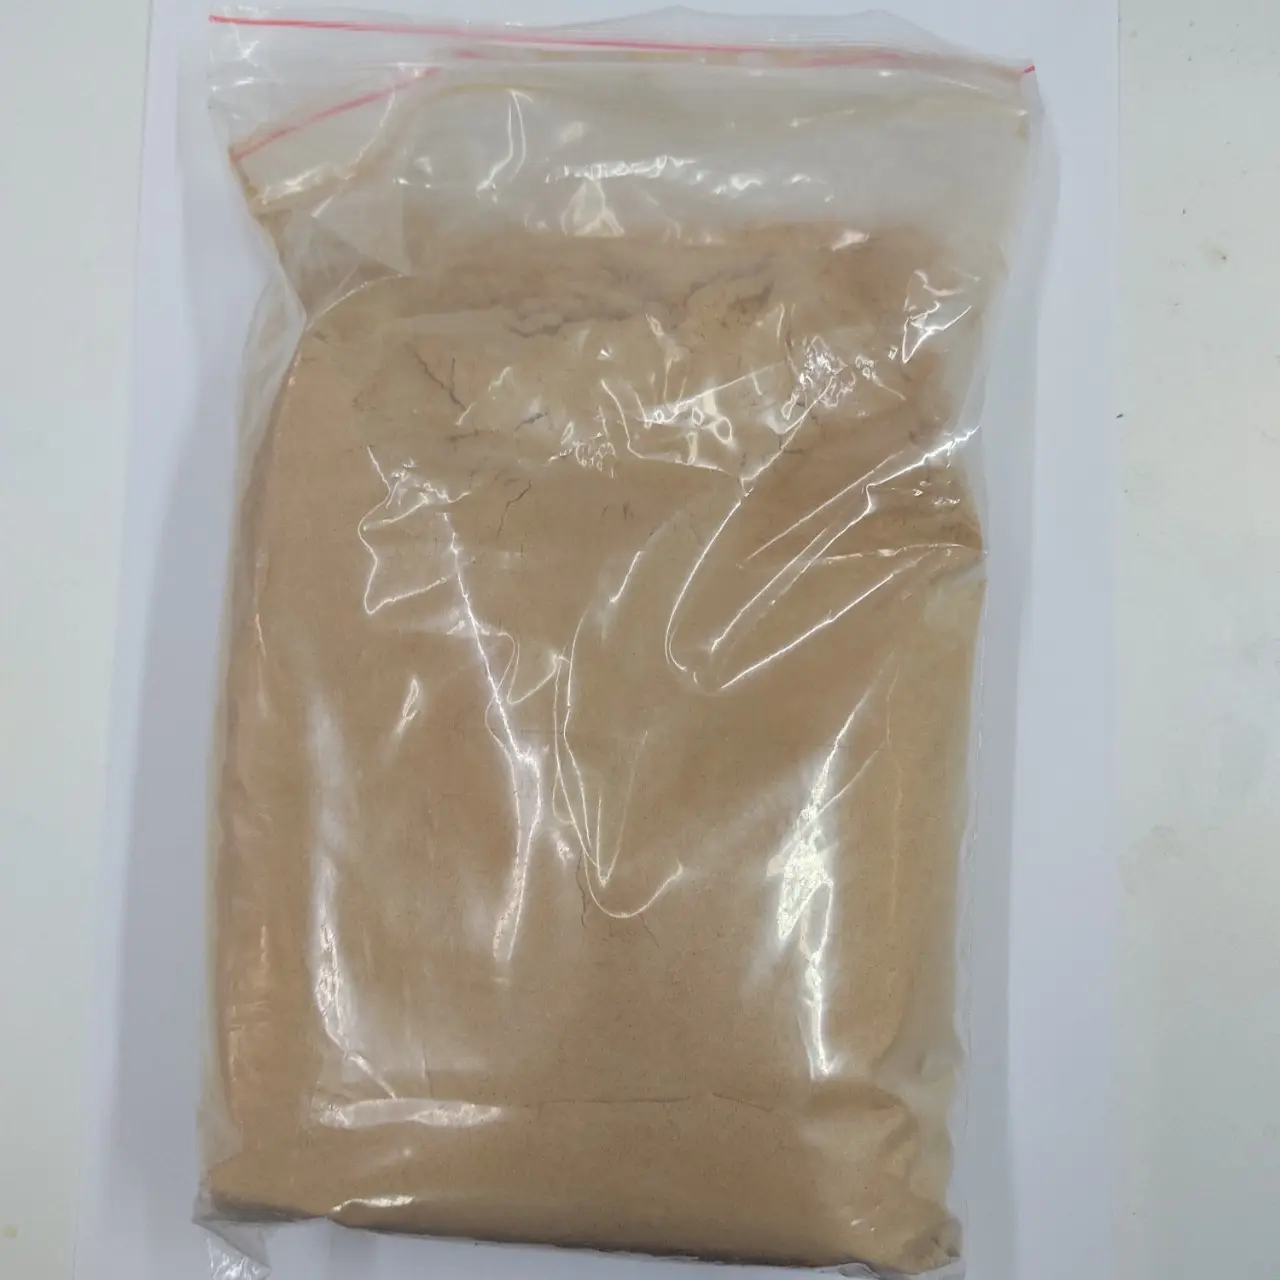 100% natural: Inactive dried brewer yeast /beer yeast powder / IVY +84977157110